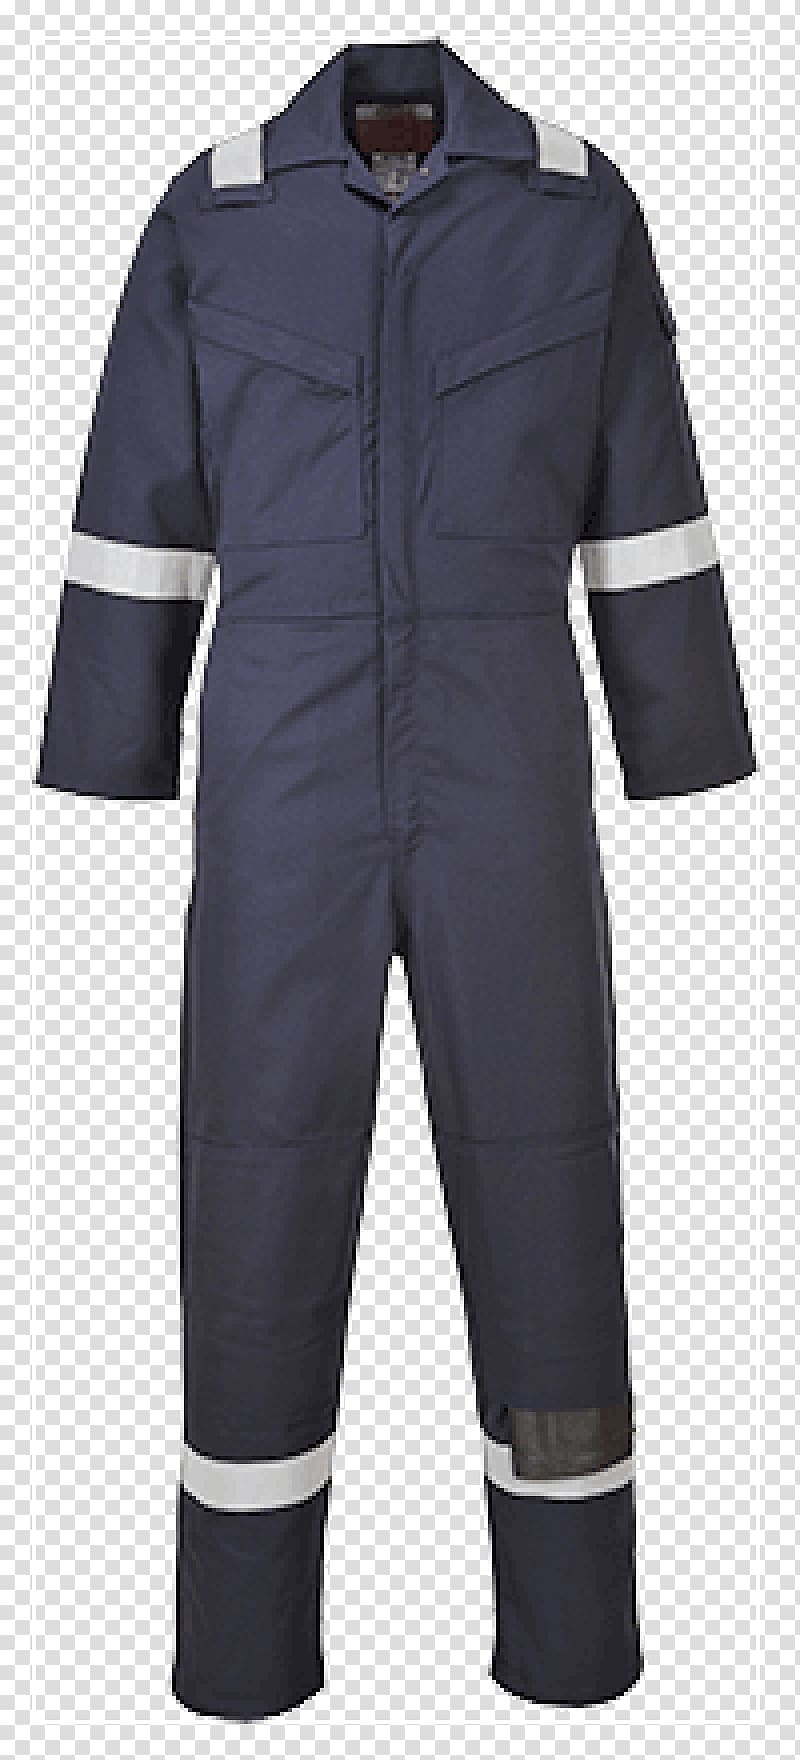 Nomex Boilersuit Flame retardant Workwear Industry, others transparent background PNG clipart